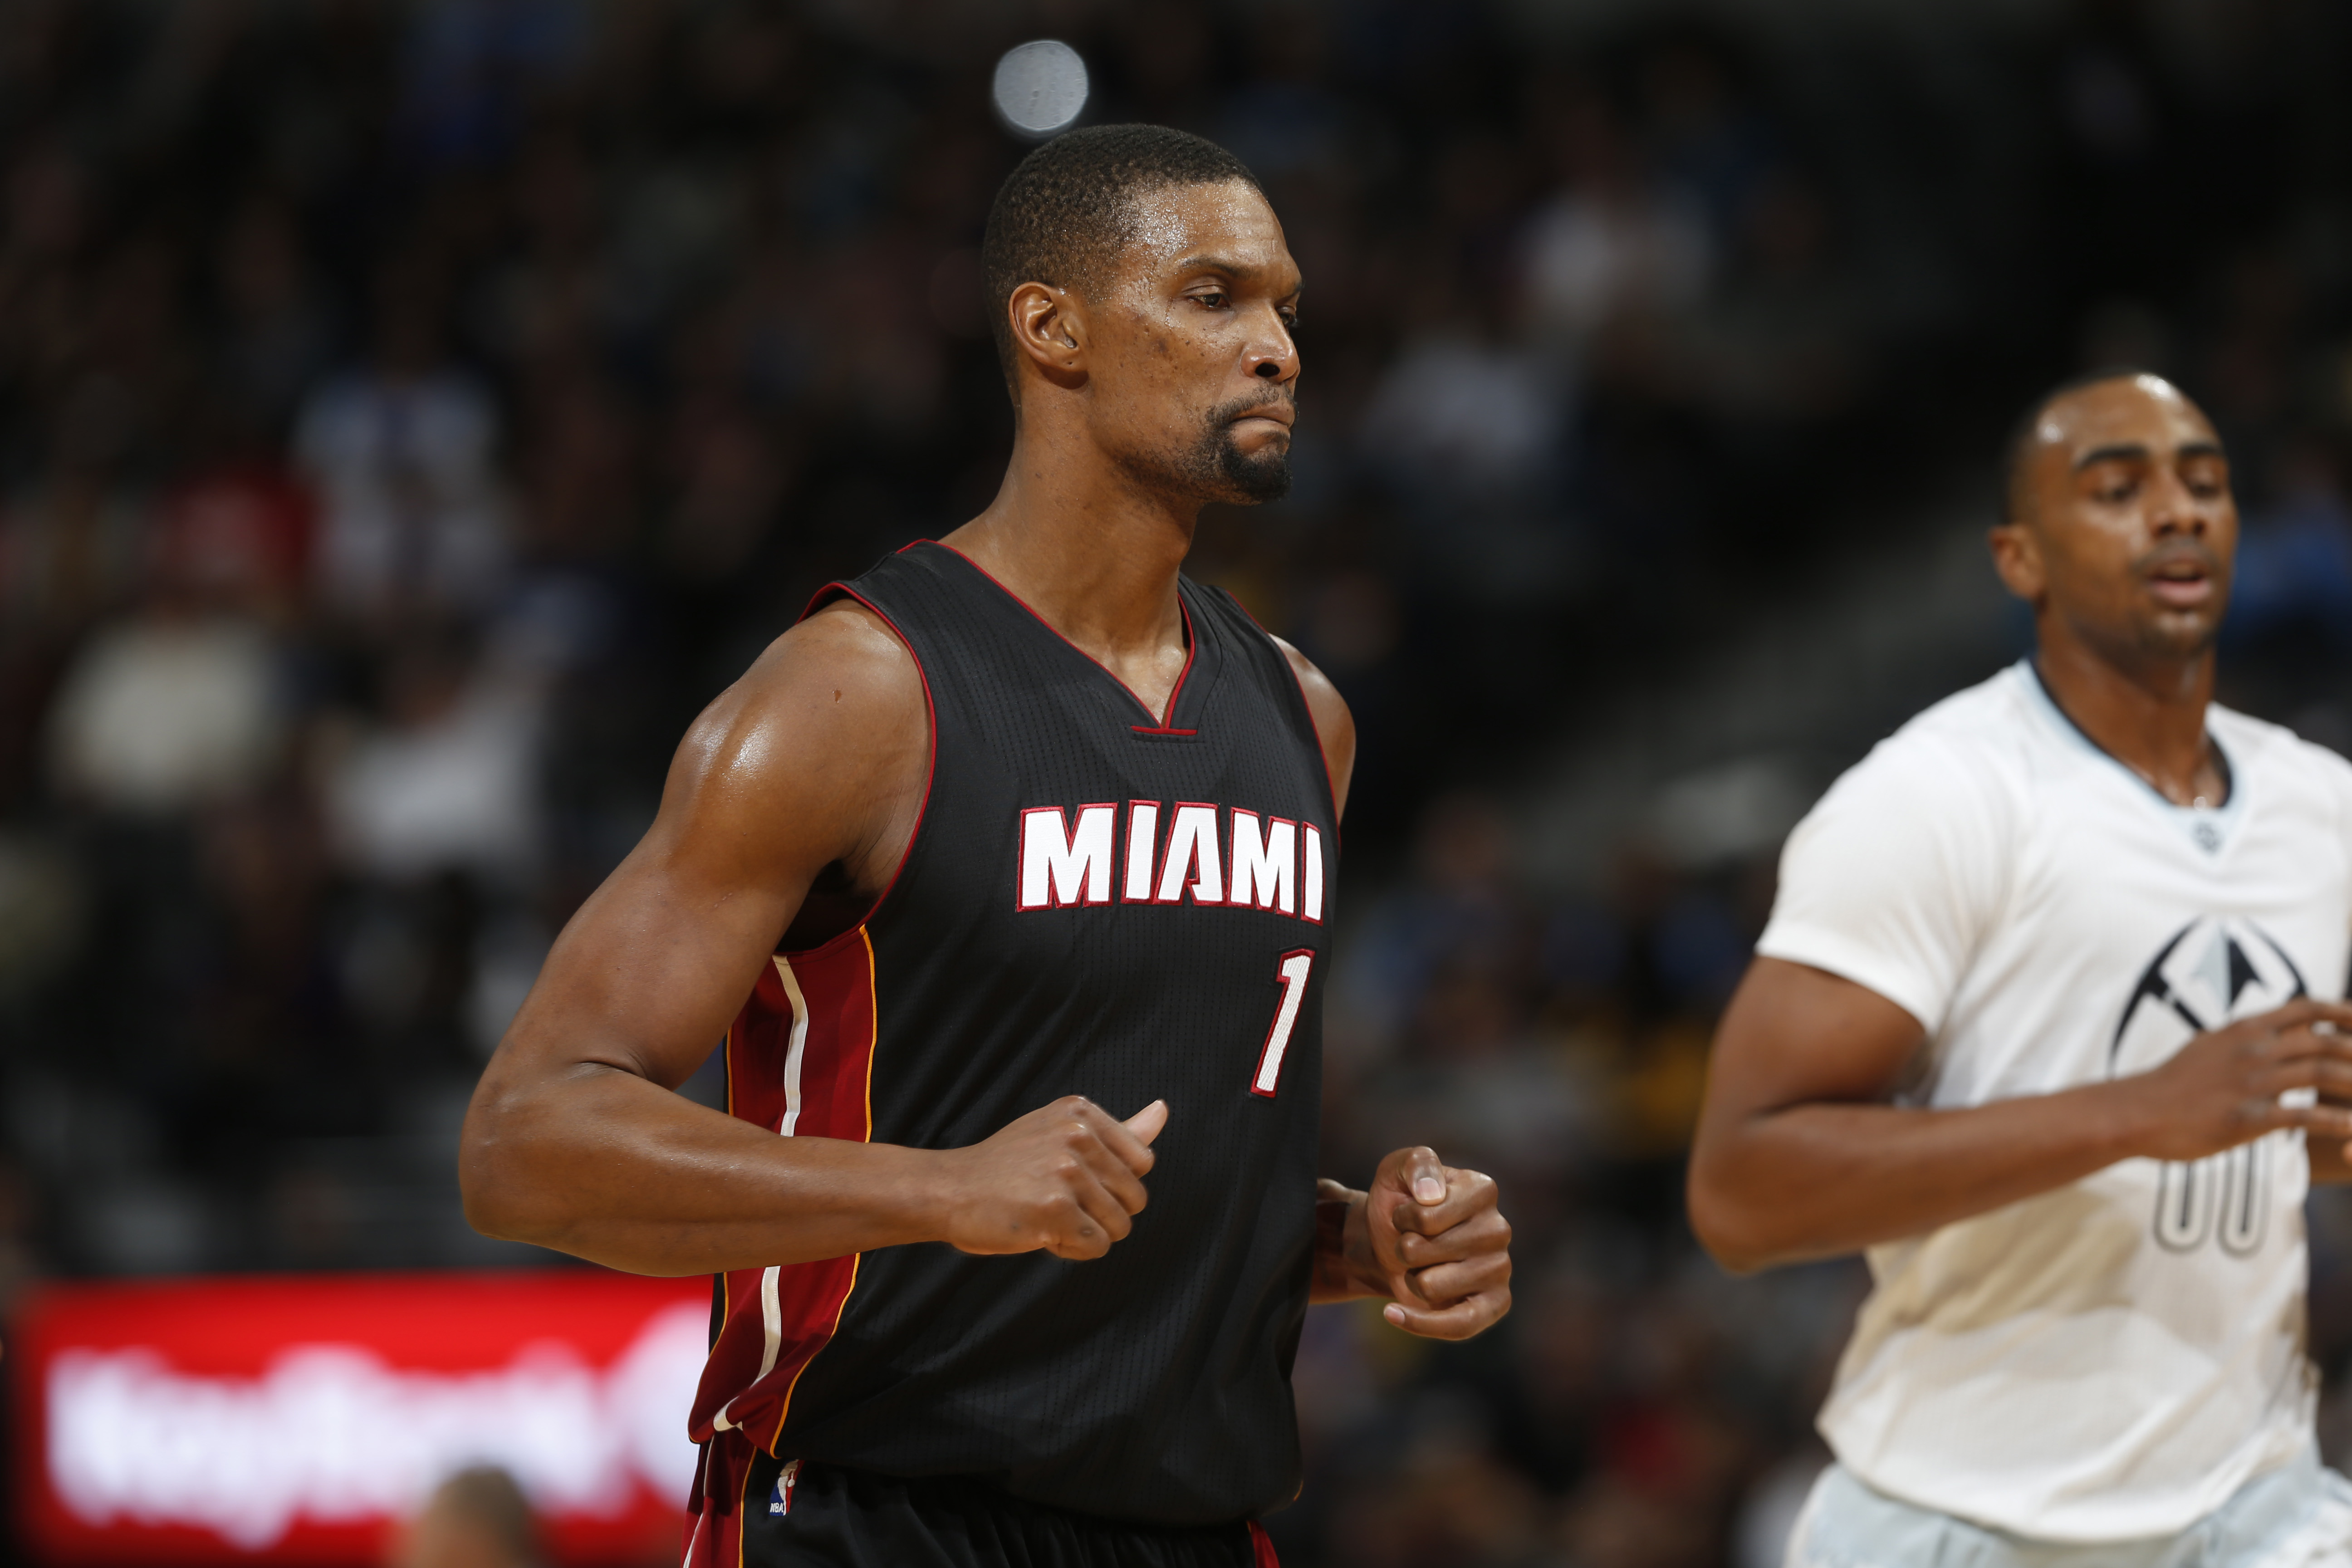 Lincoln grad Chris Bosh released by Miami Heat, will have jersey retired